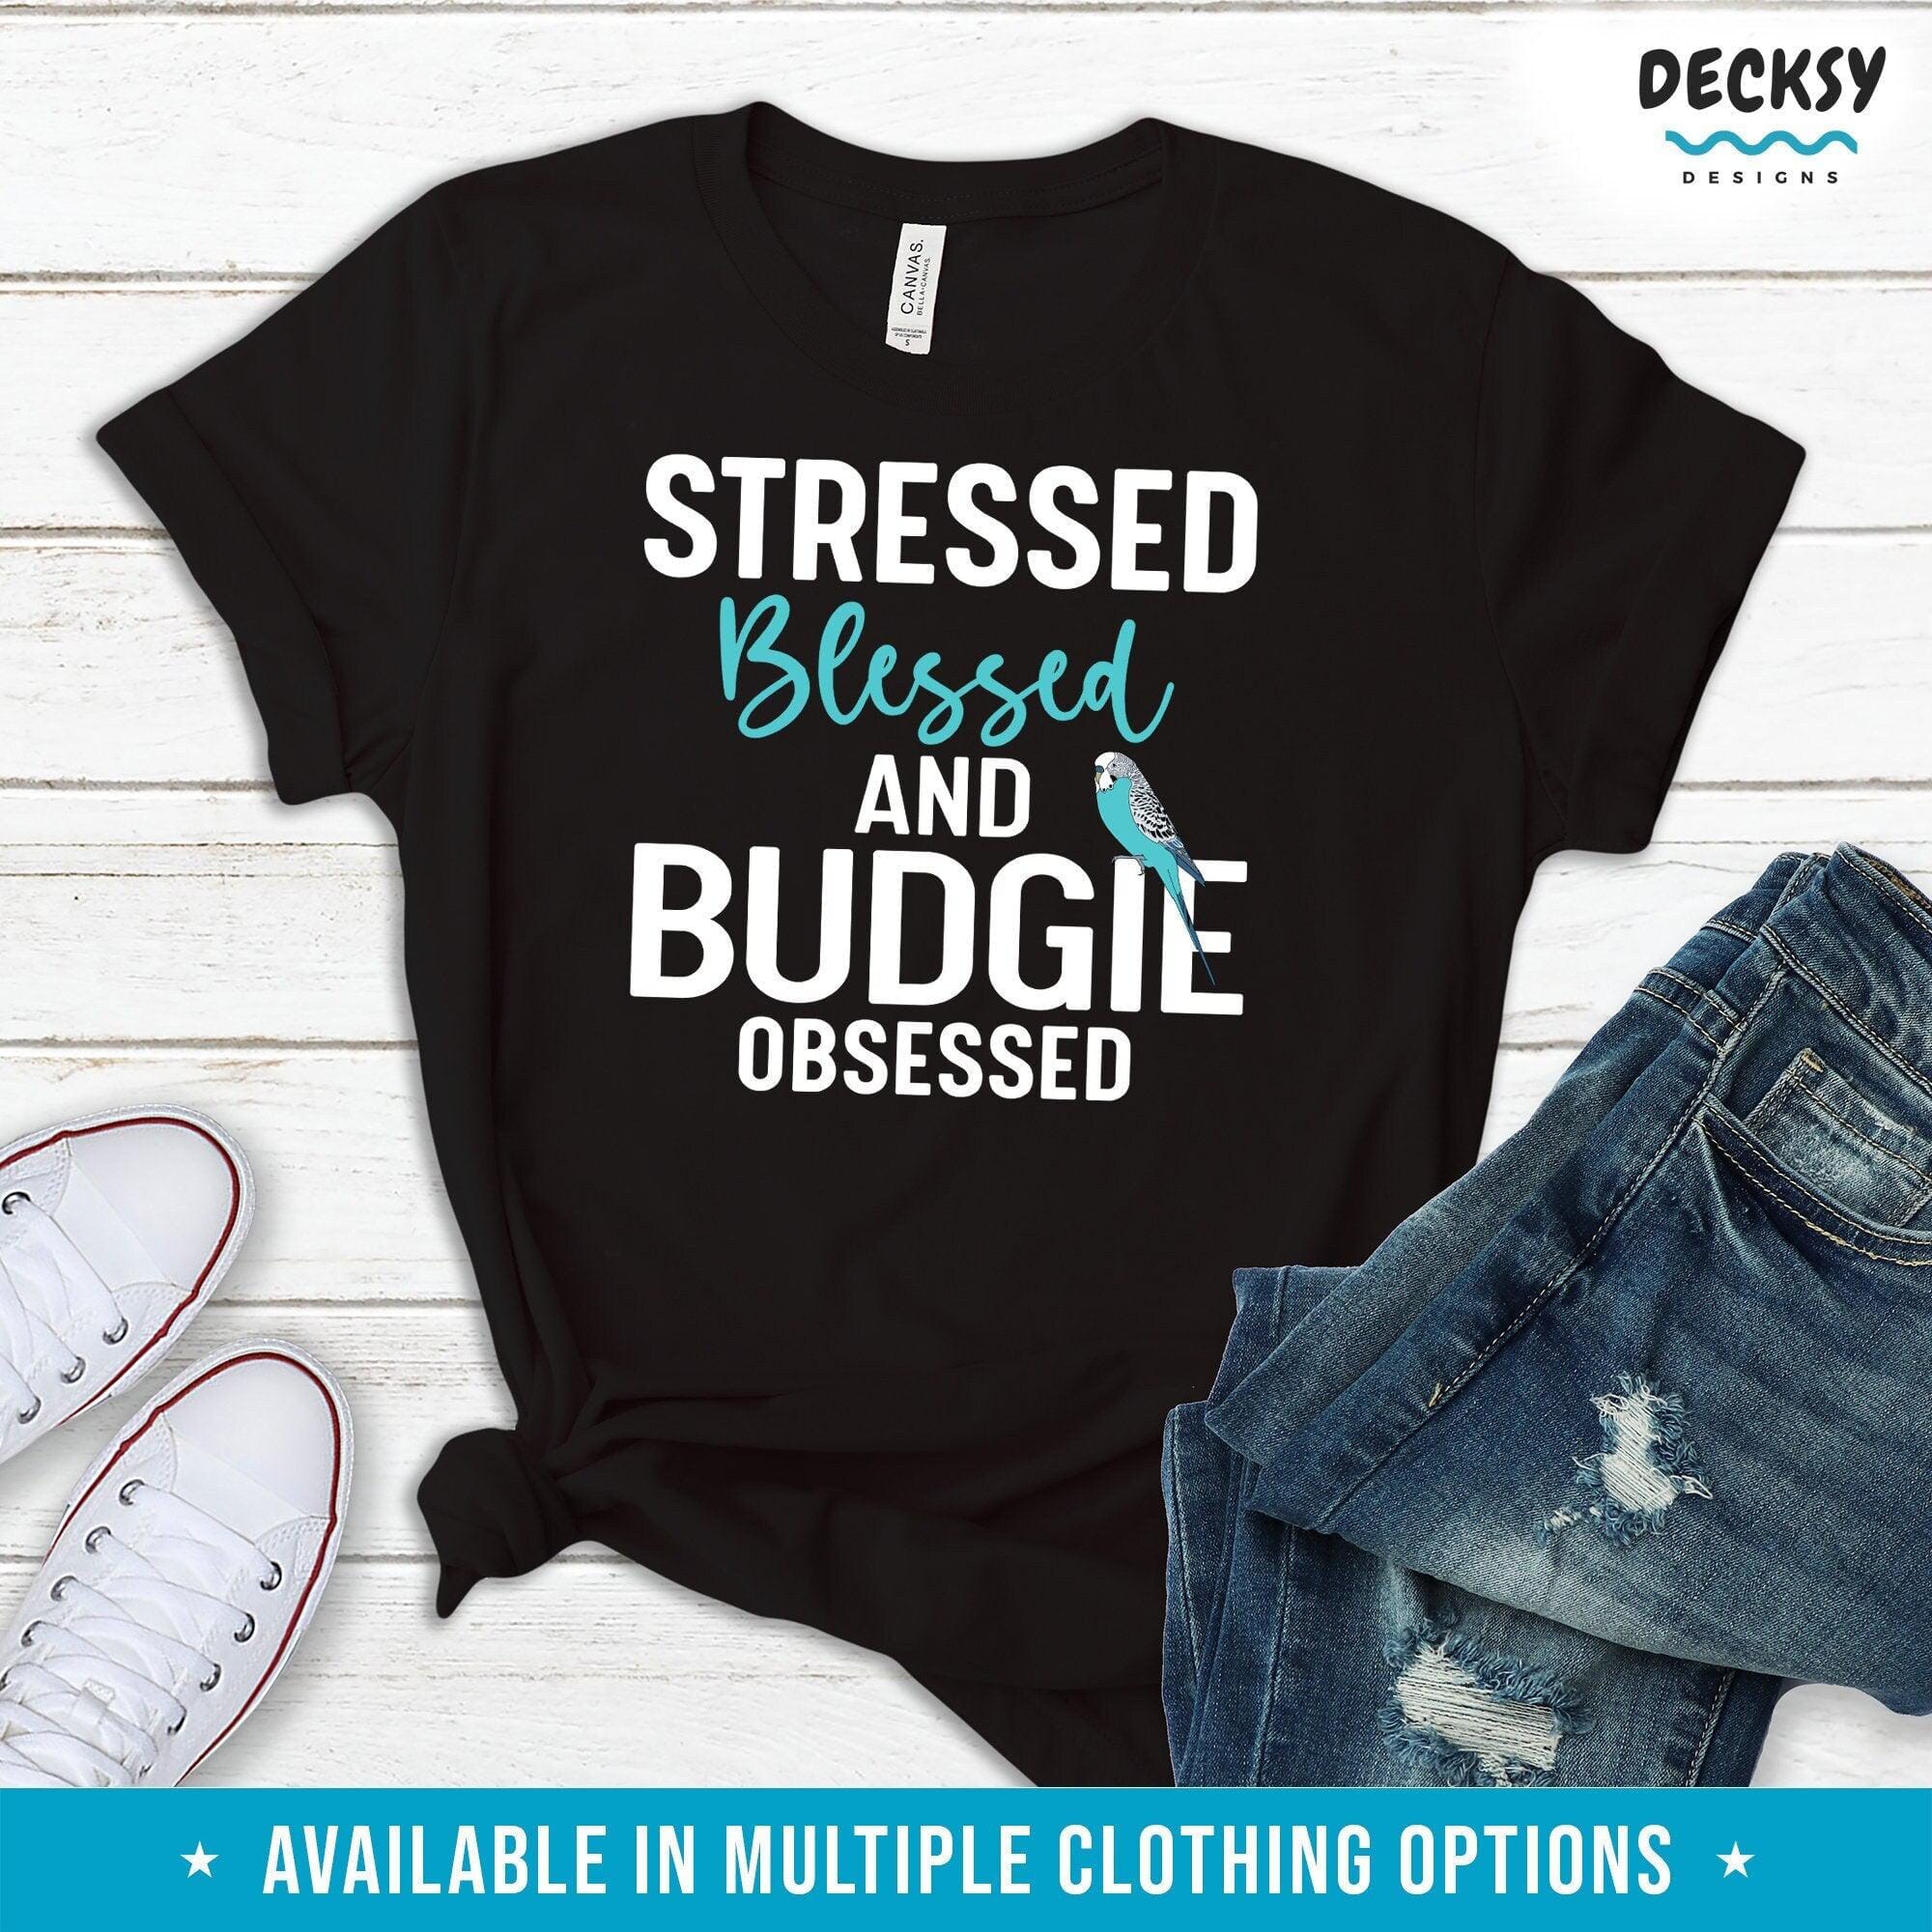 Budgie Shirt, Bird Lover Gift-Clothing:Gender-Neutral Adult Clothing:Tops & Tees:T-shirts:Graphic Tees-DecksyDesigns